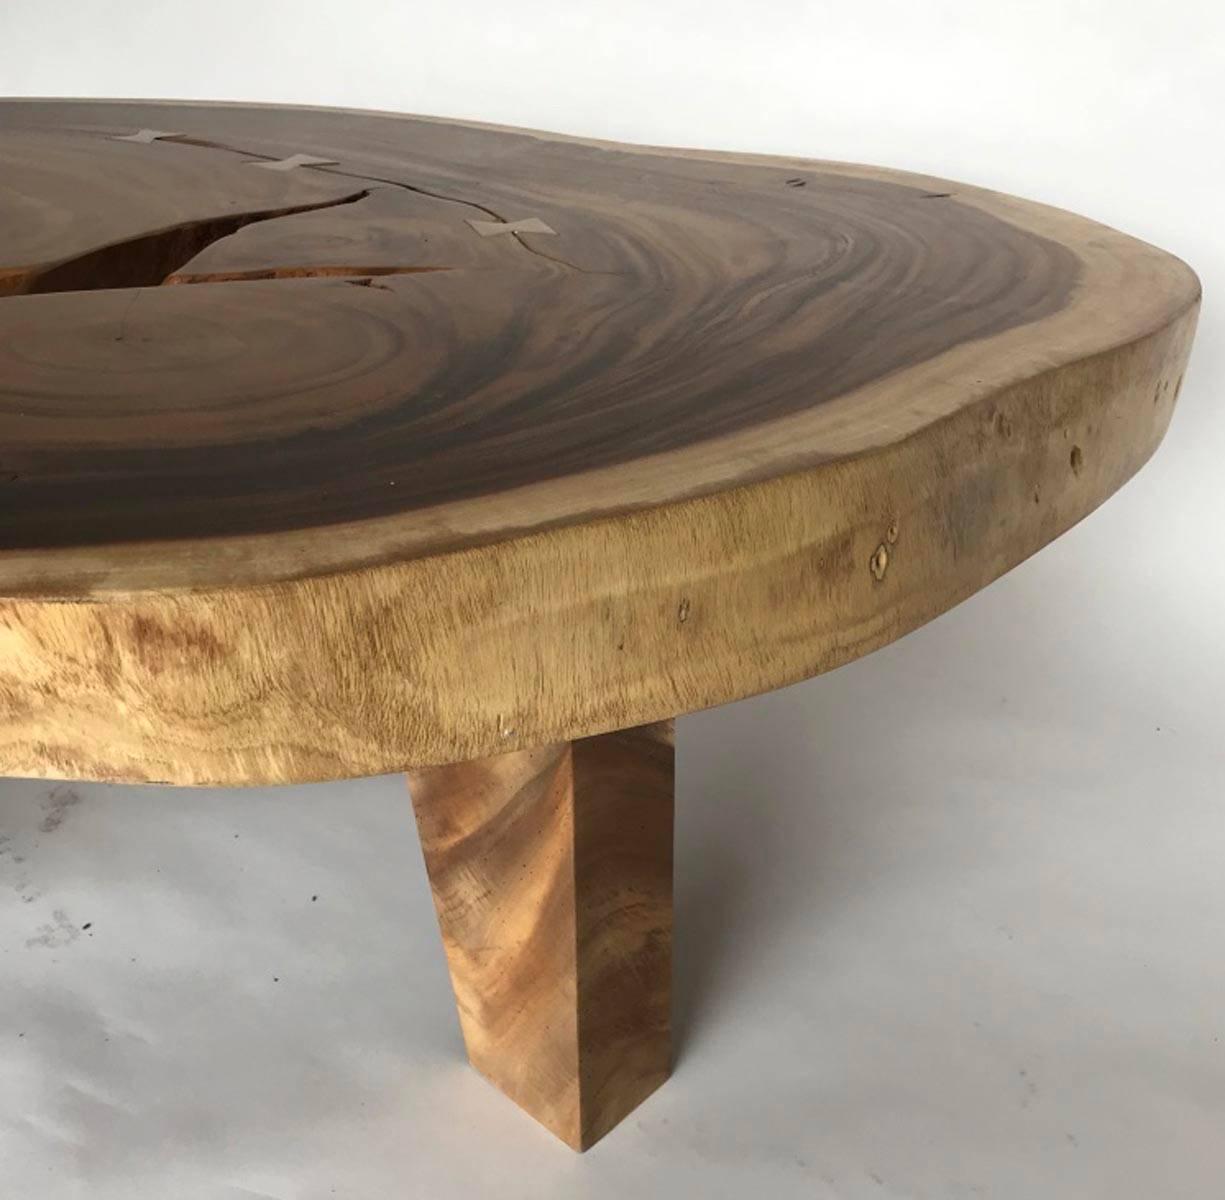 20th Century Free-Form Wood Coffee Table